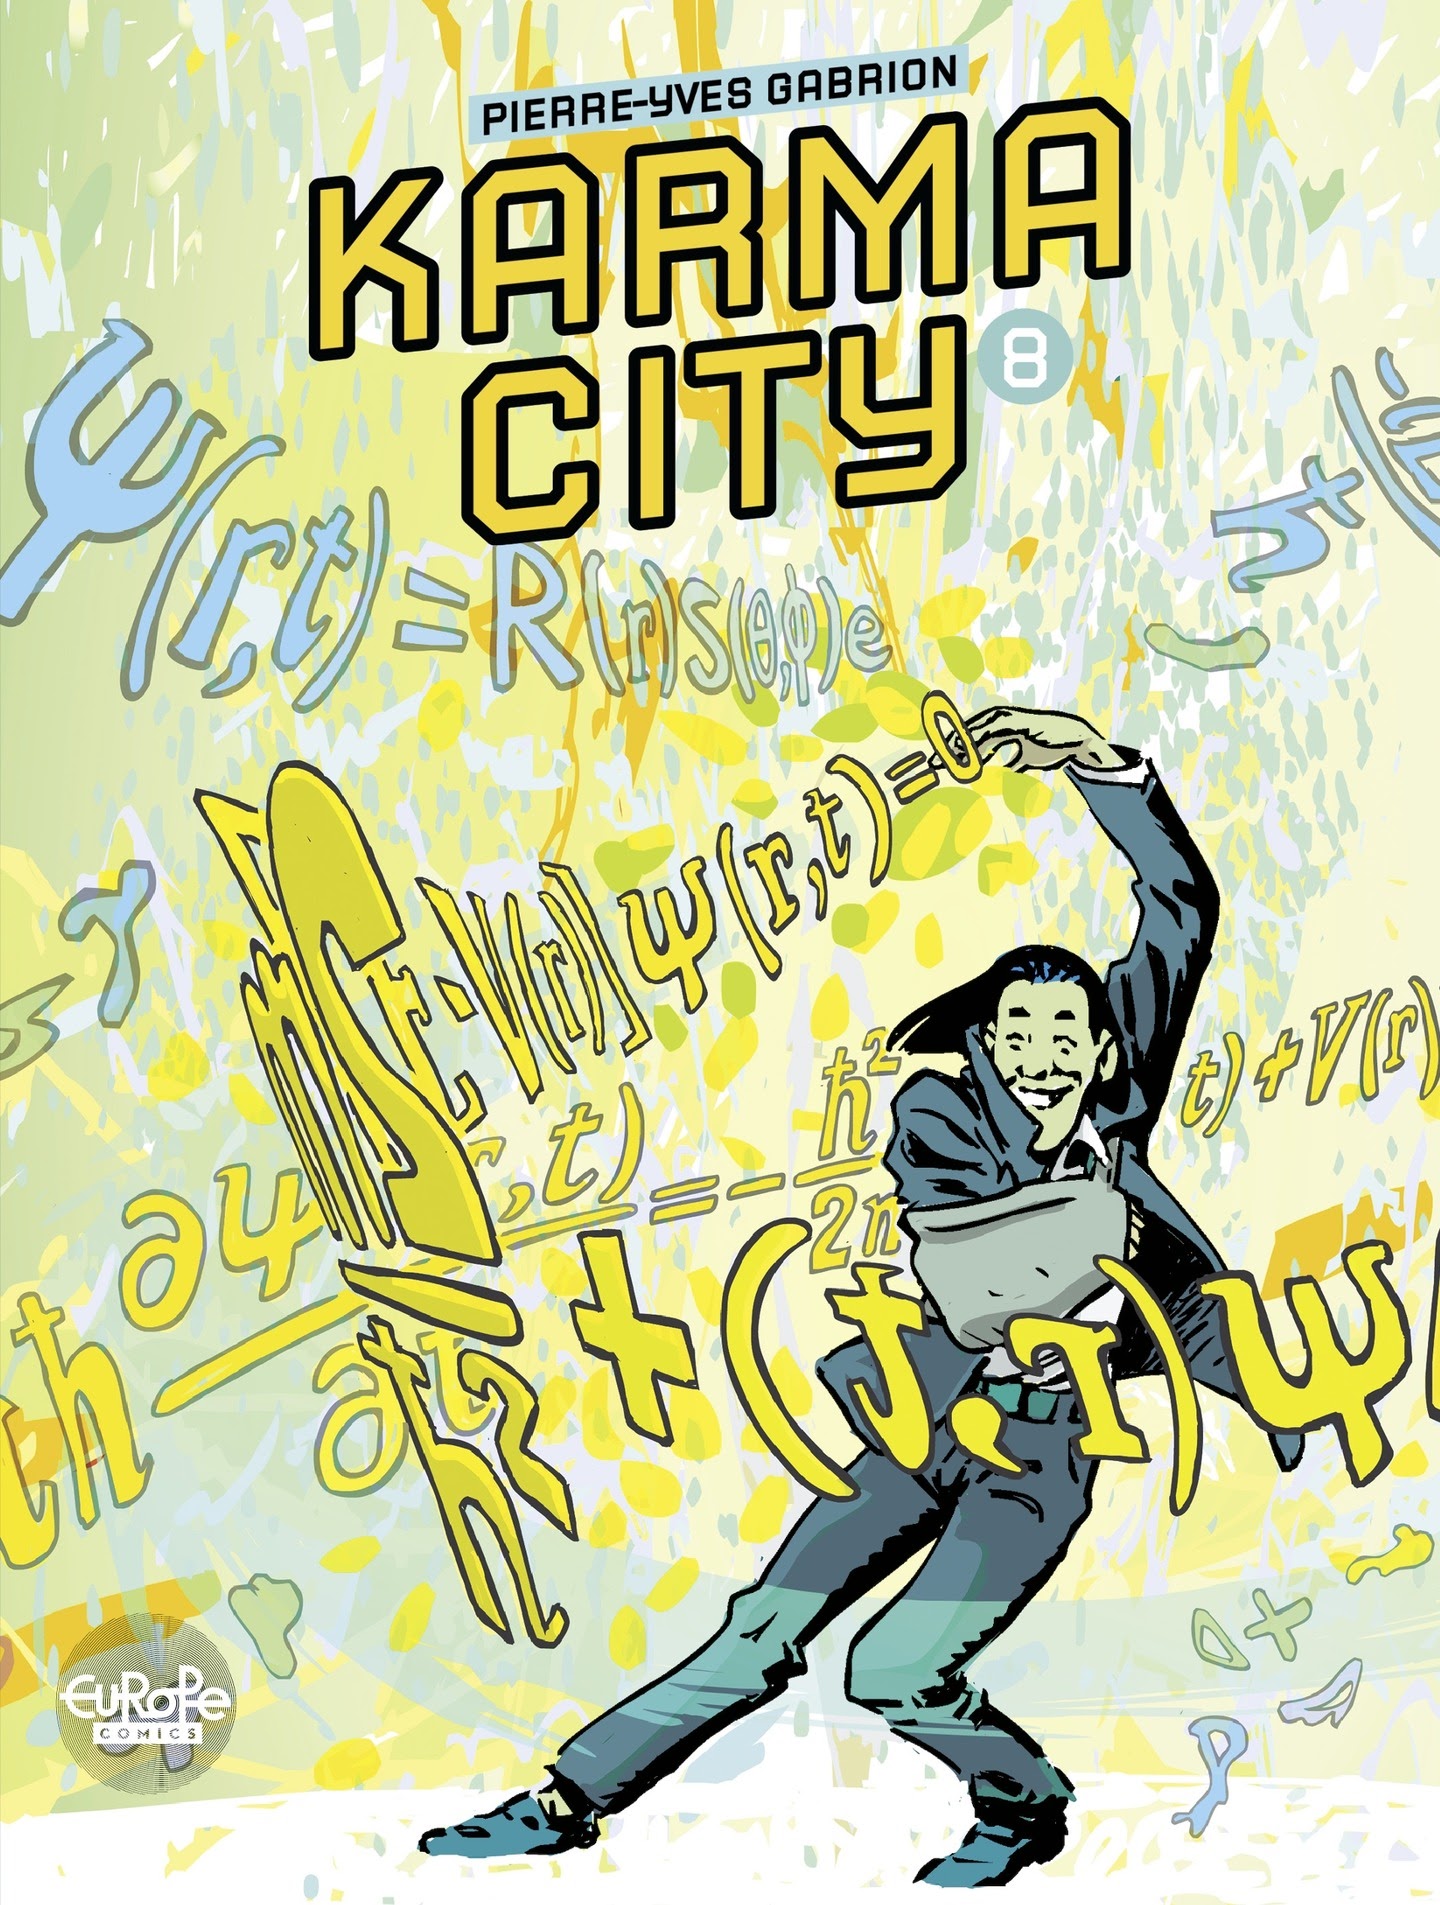 Read online Karma City comic -  Issue #8 - 1